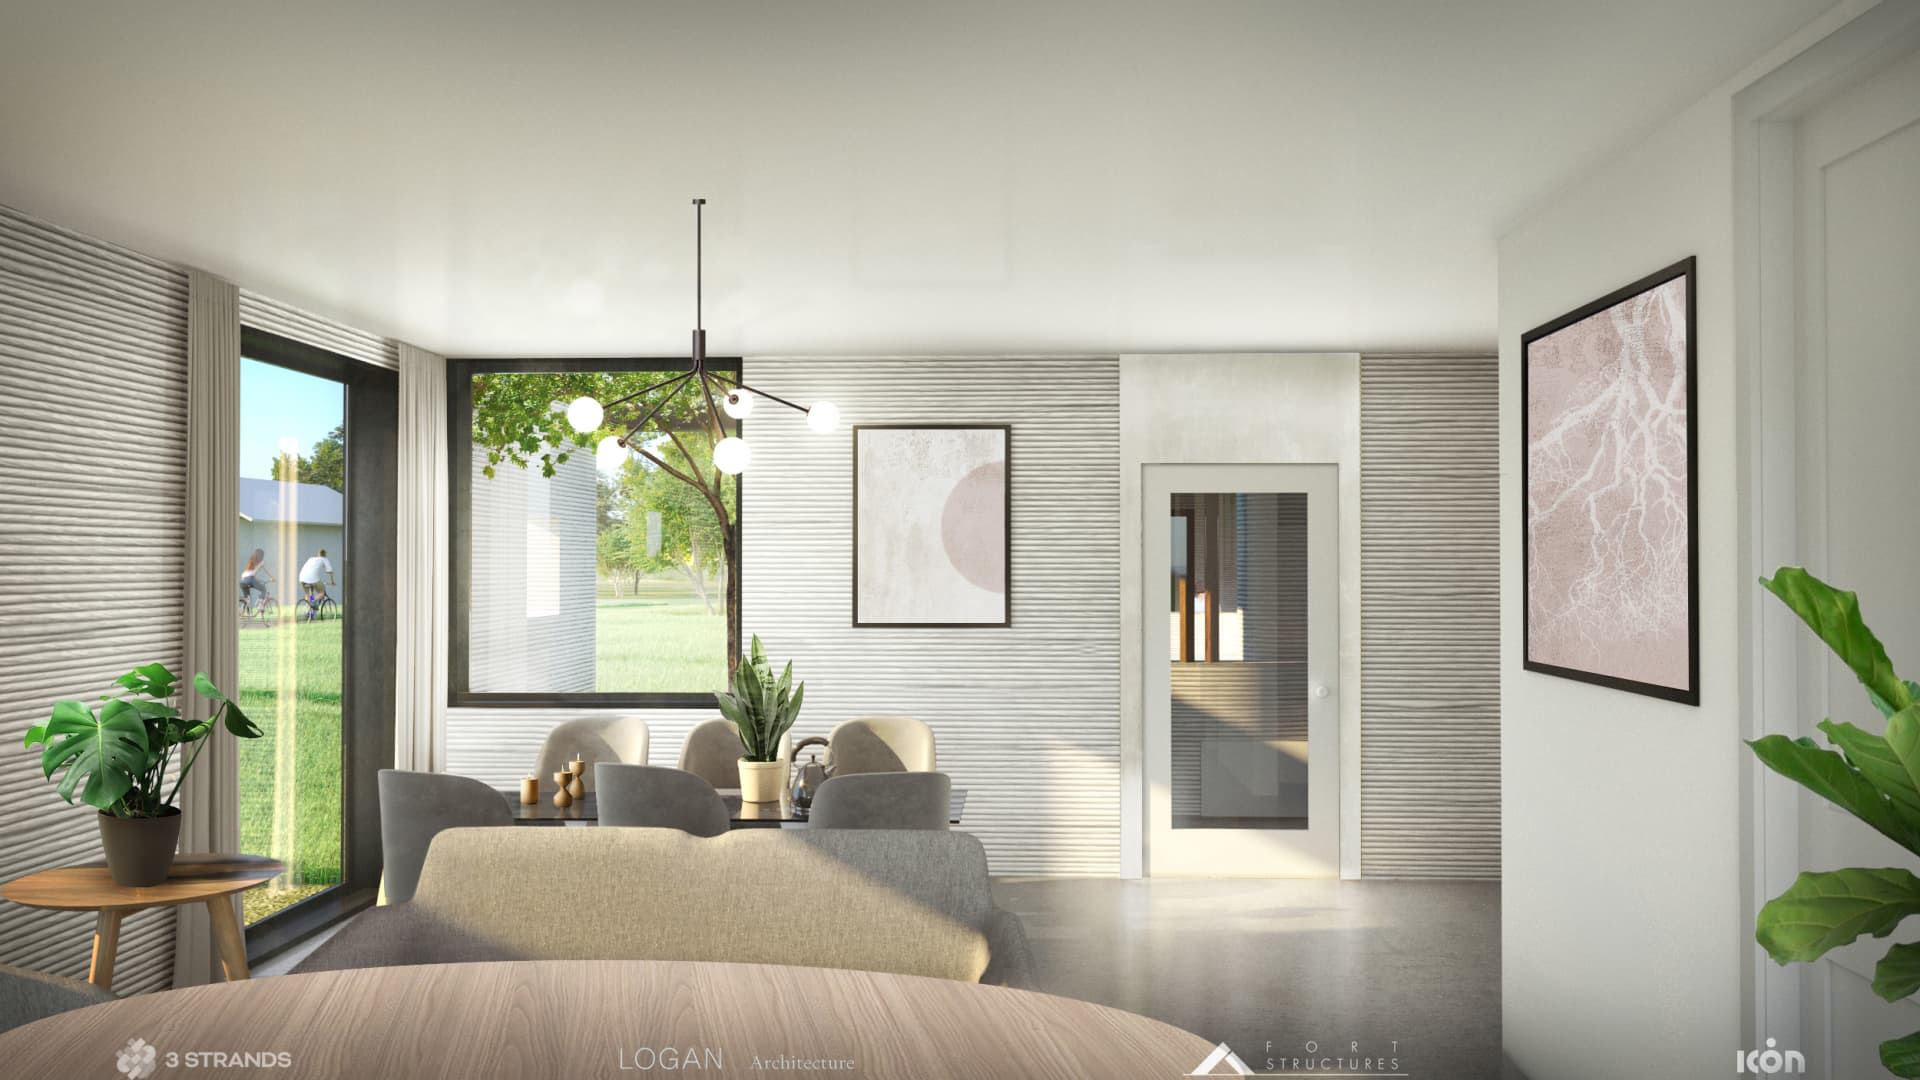 A rendering of 3D printed home interior by 3Strands and ICON.